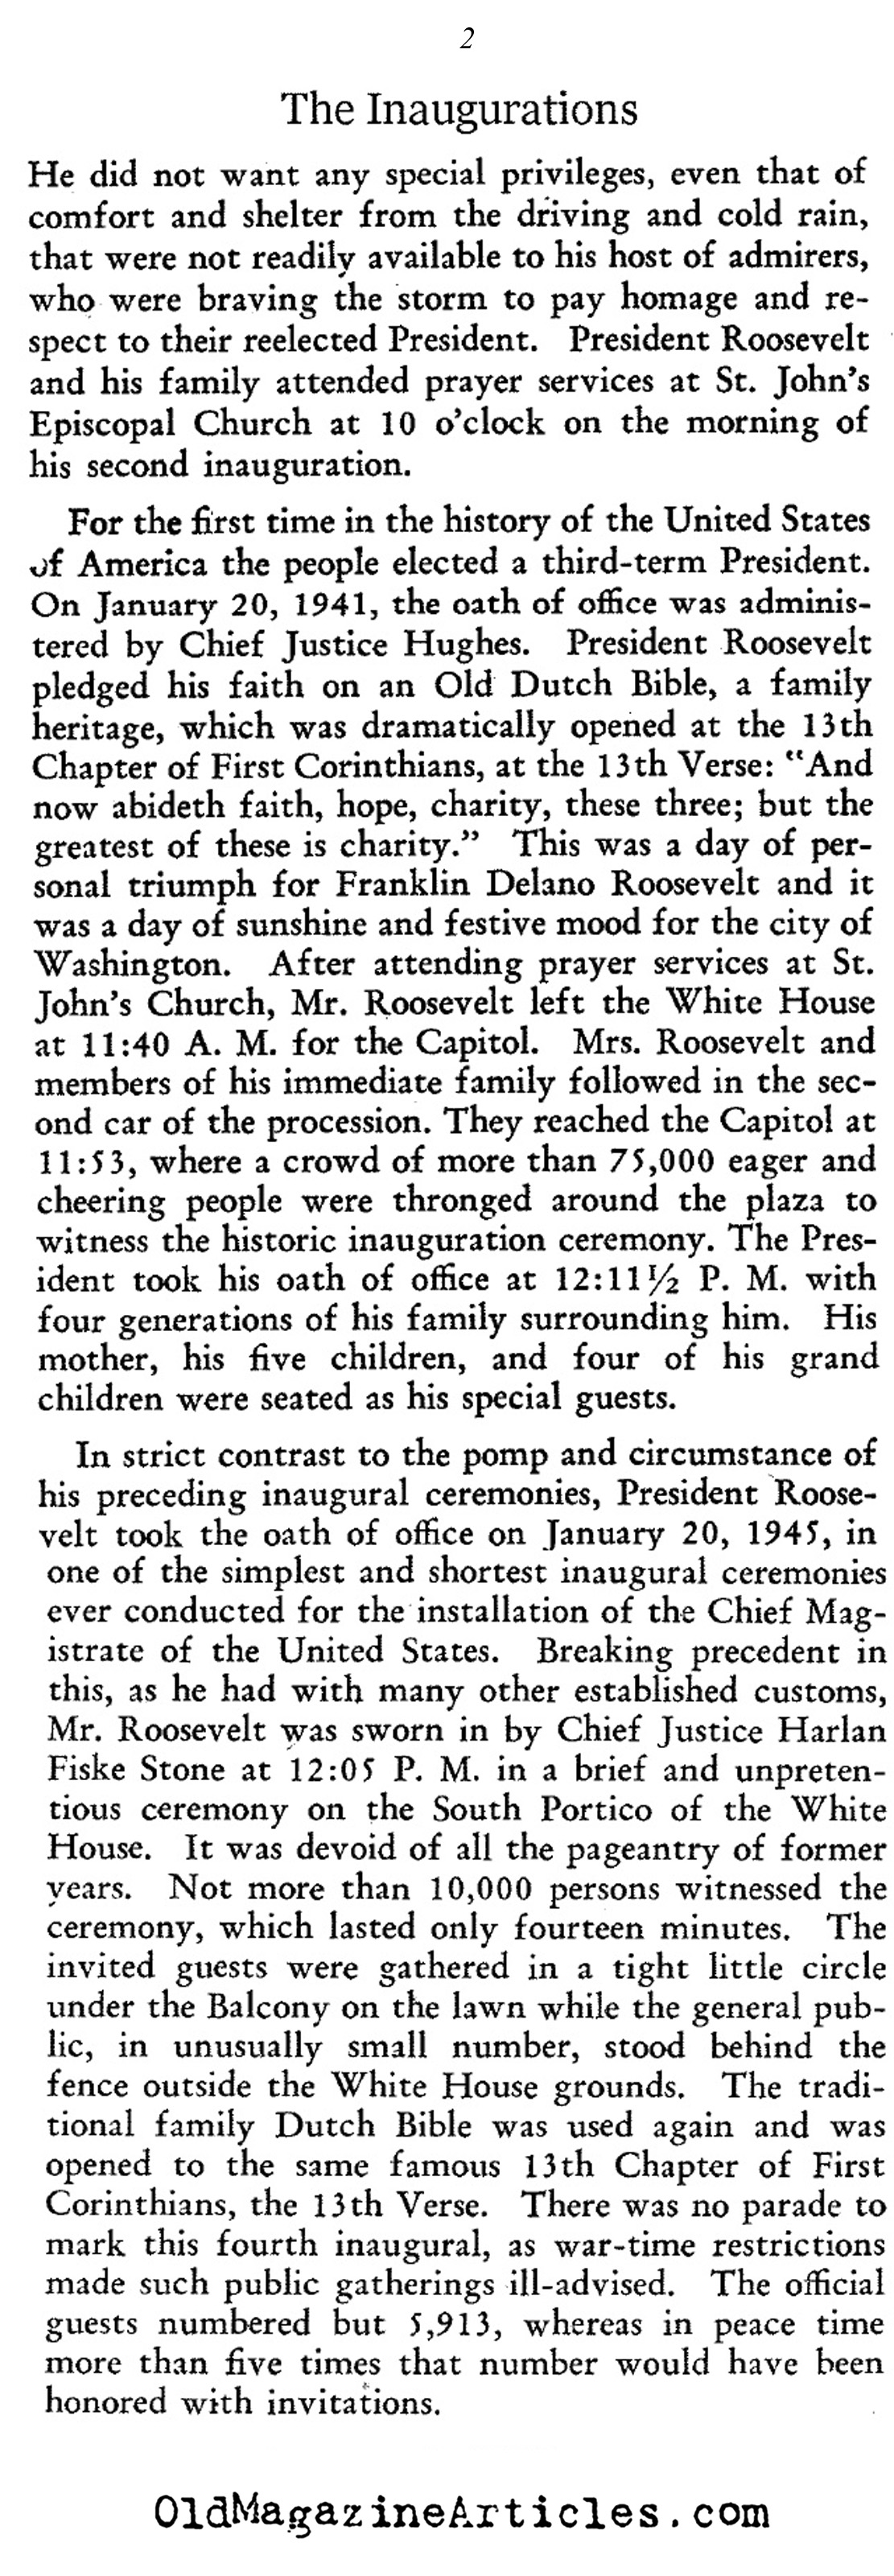 The Four Inaugurations of F.D.R. (from the Truman Inaugural Program, 1949)